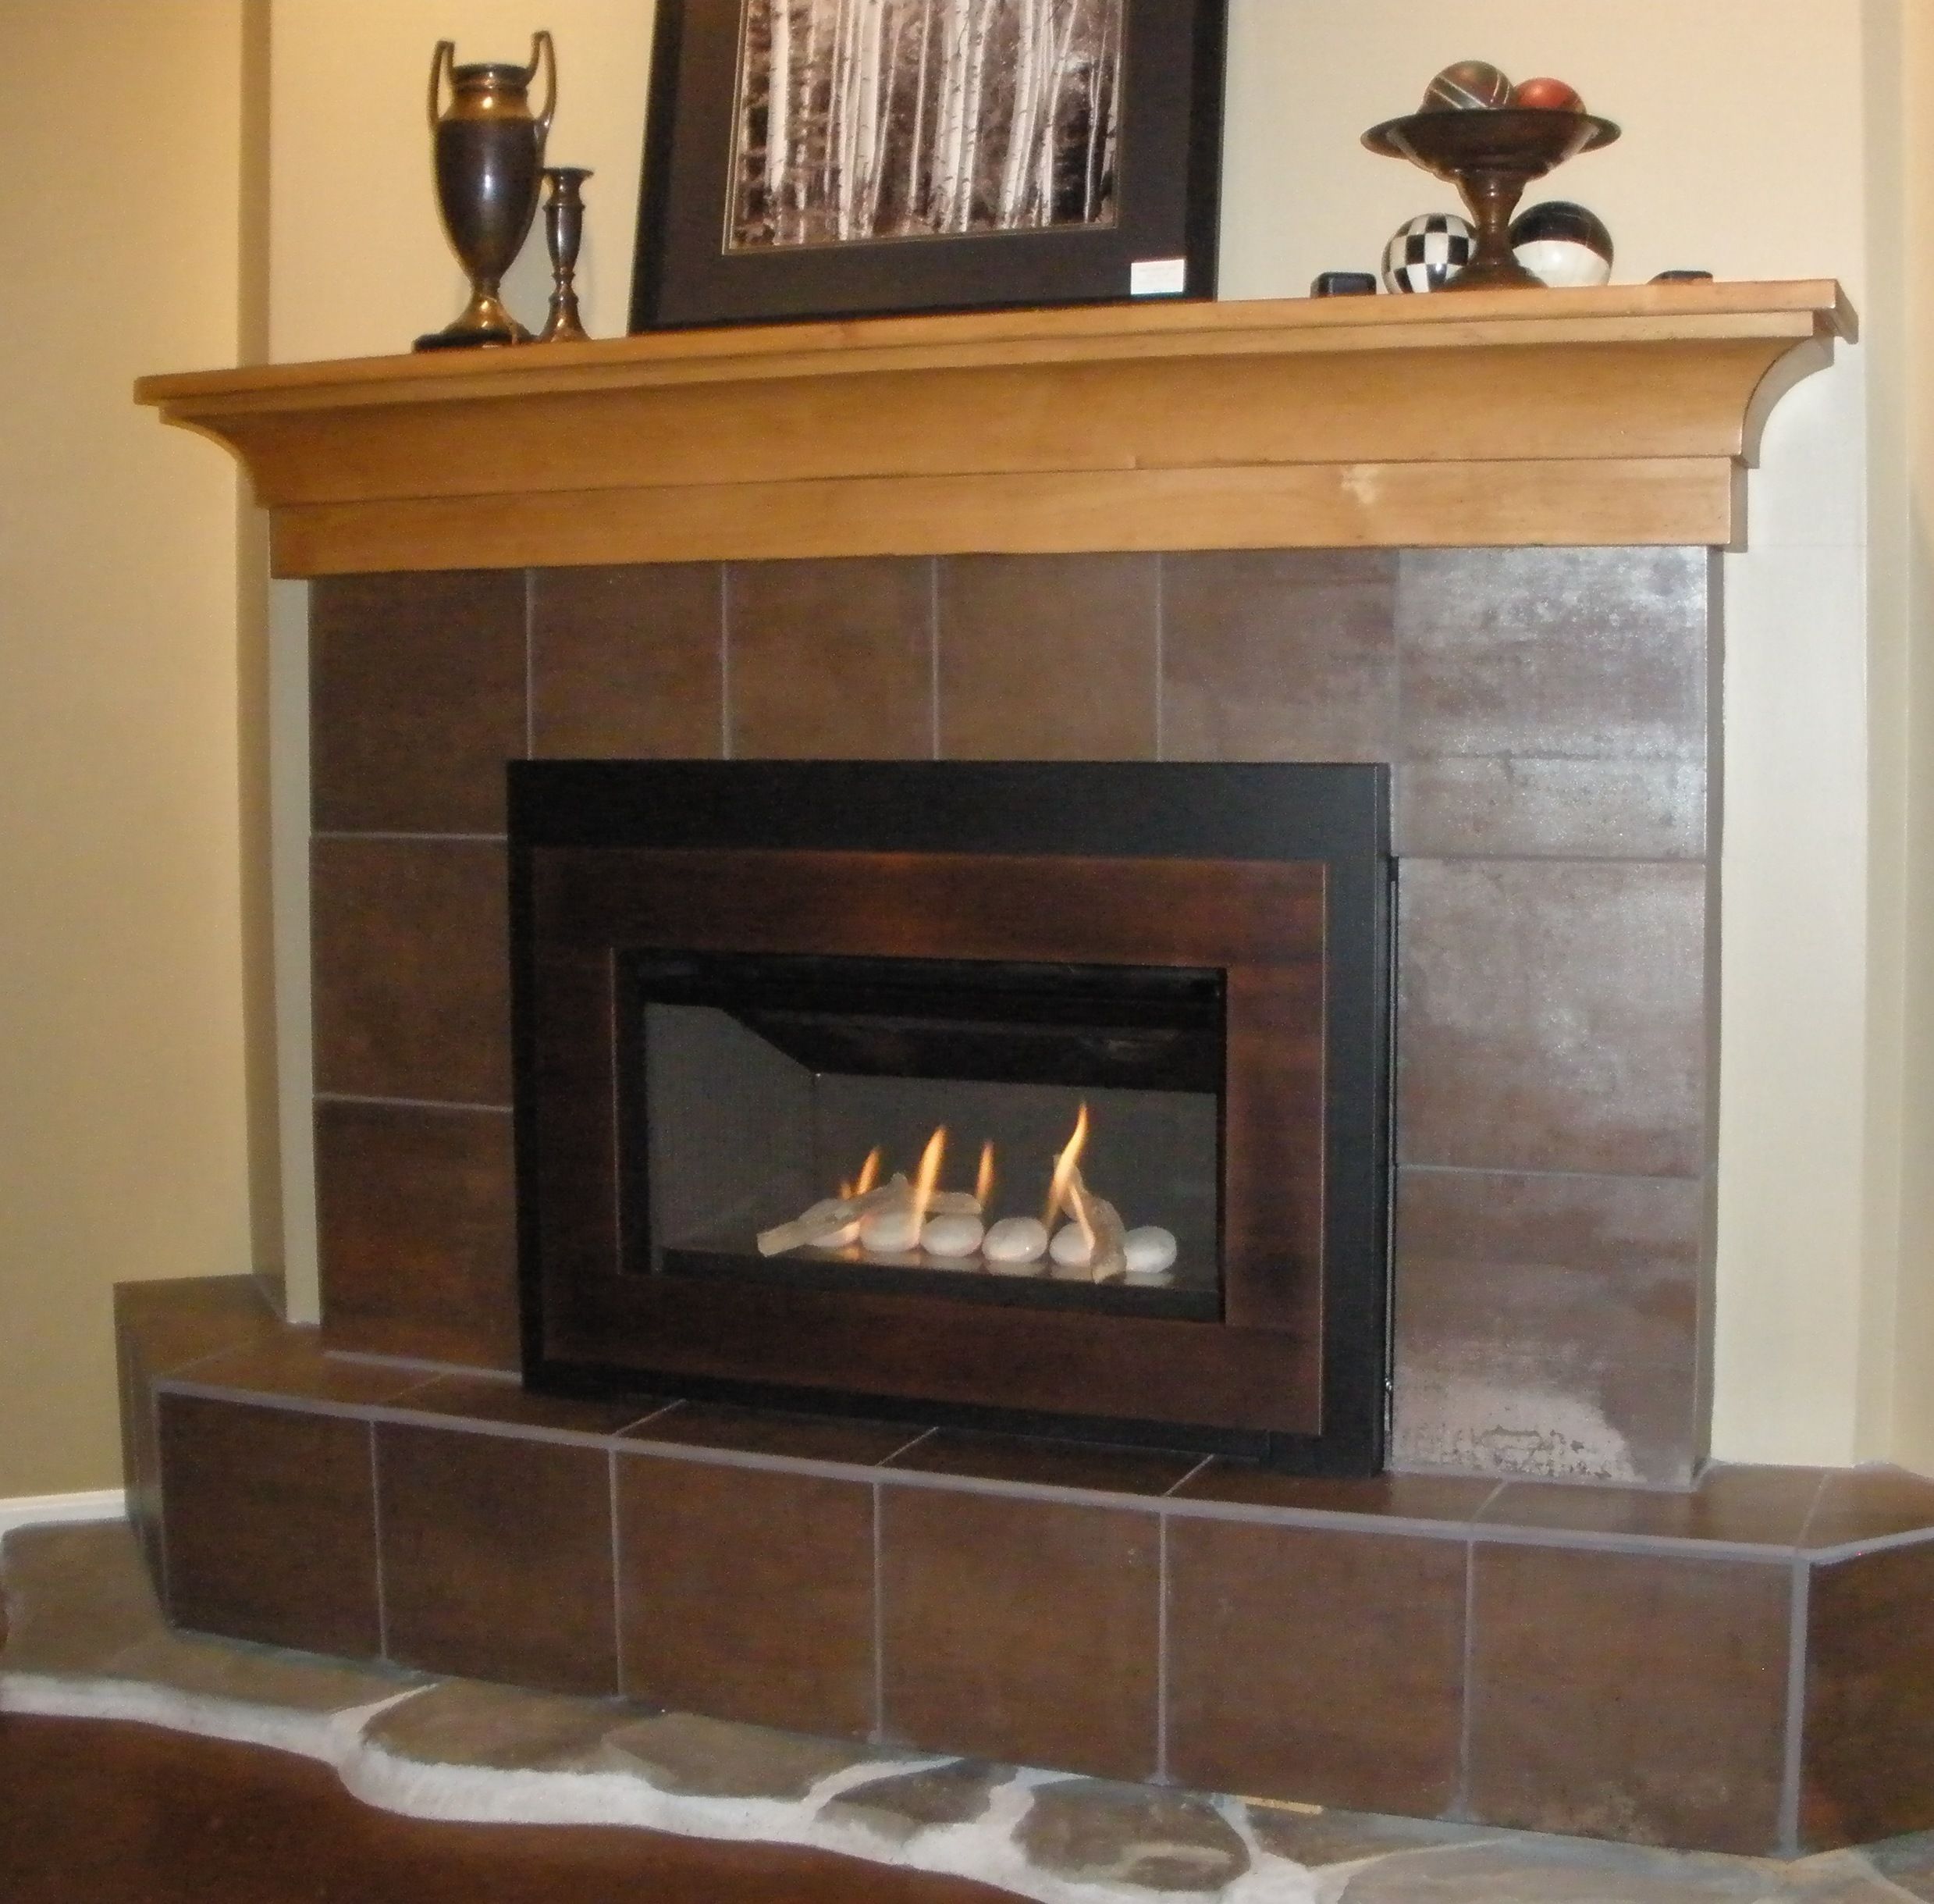 Mountable Fireplace Lovely Pin On Valor Radiant Gas Fireplaces Midwest Dealer